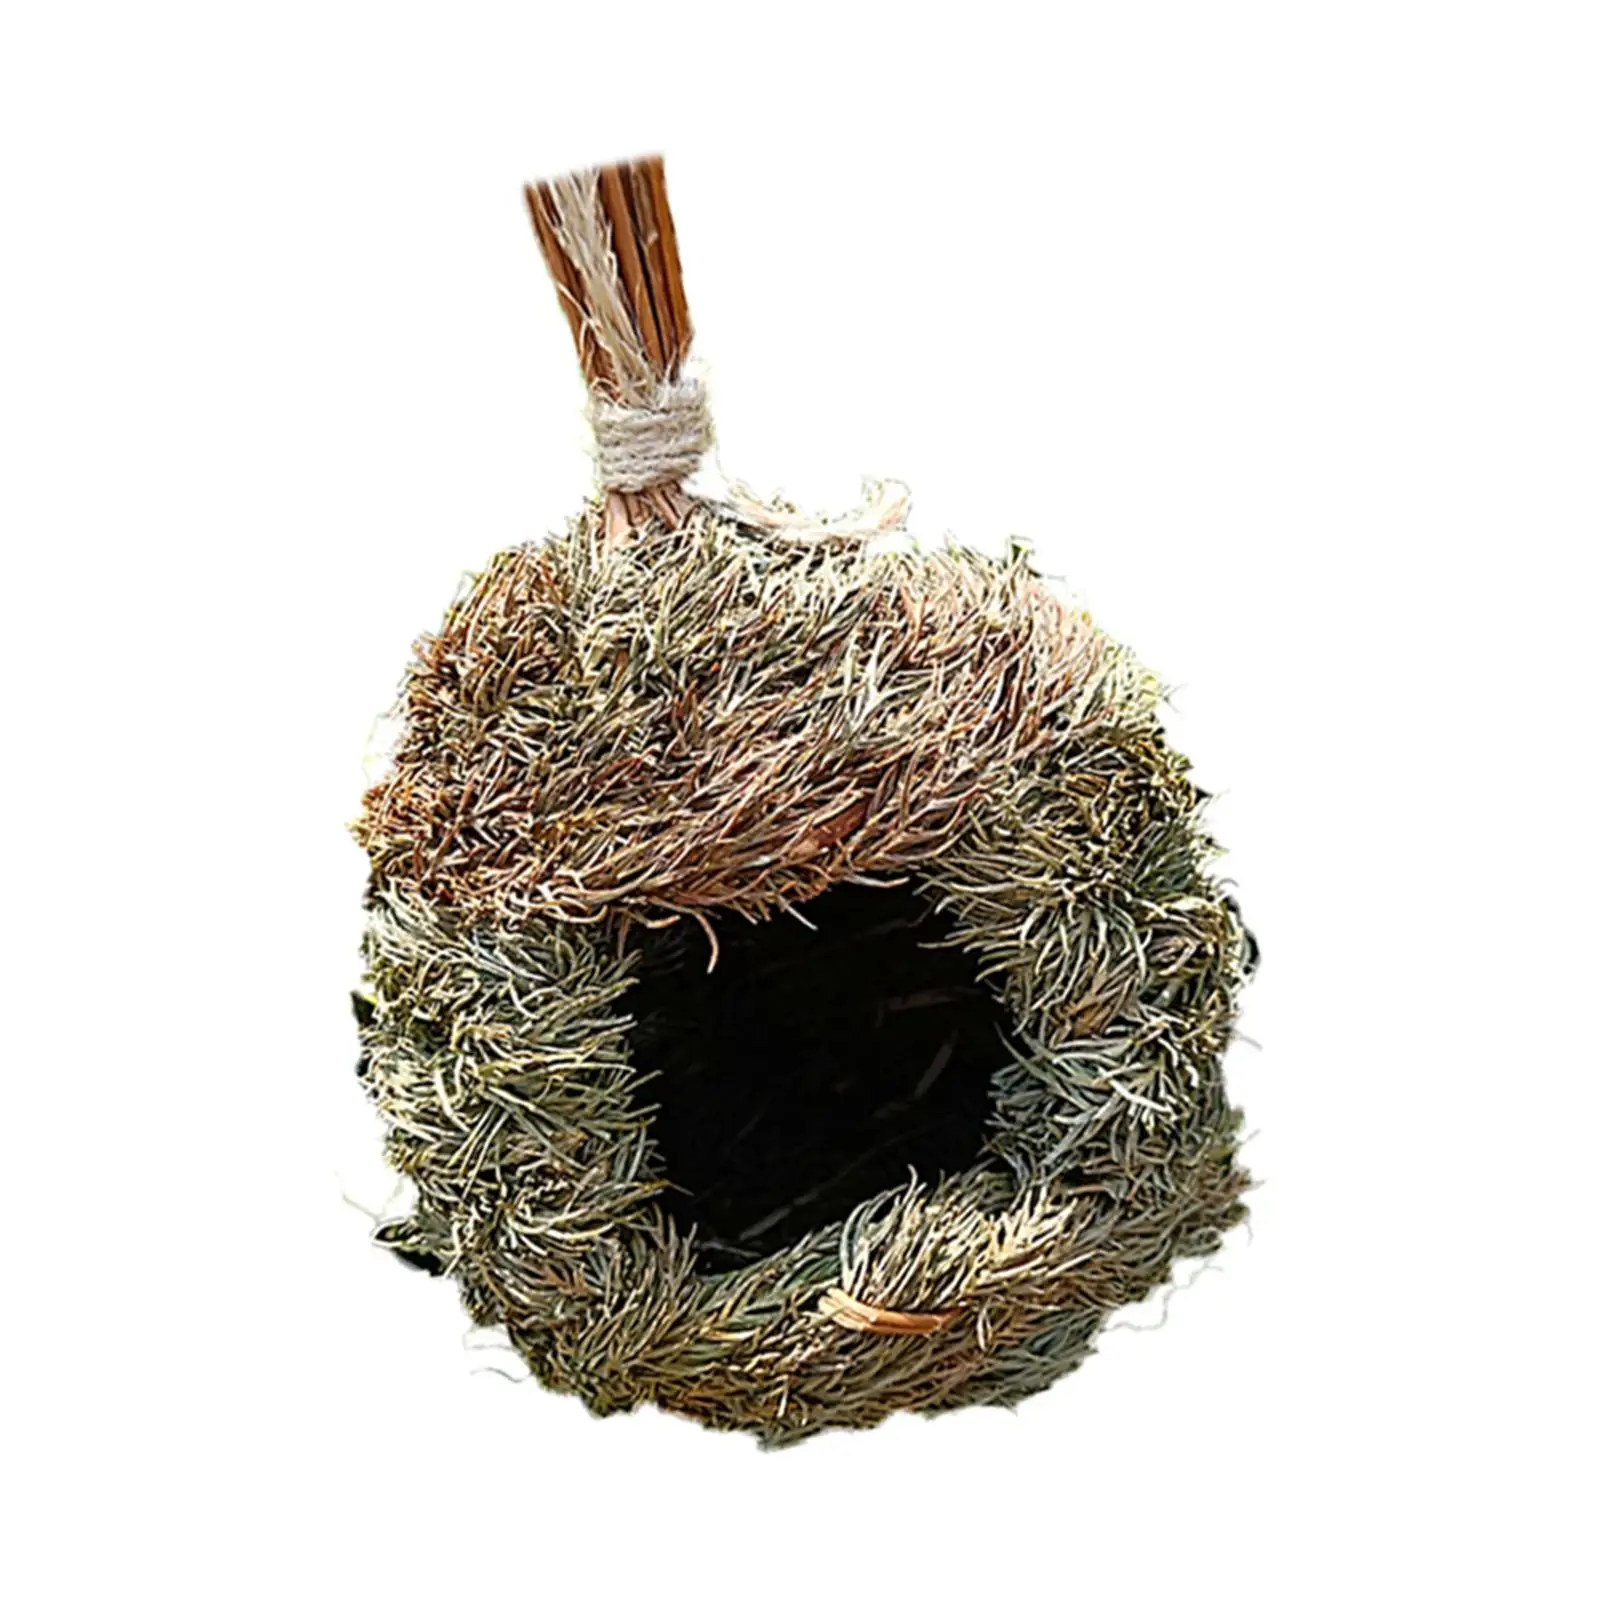 Hanging Birdhouses Hand Woven Natural Bird Hut for Home Chickadee Office